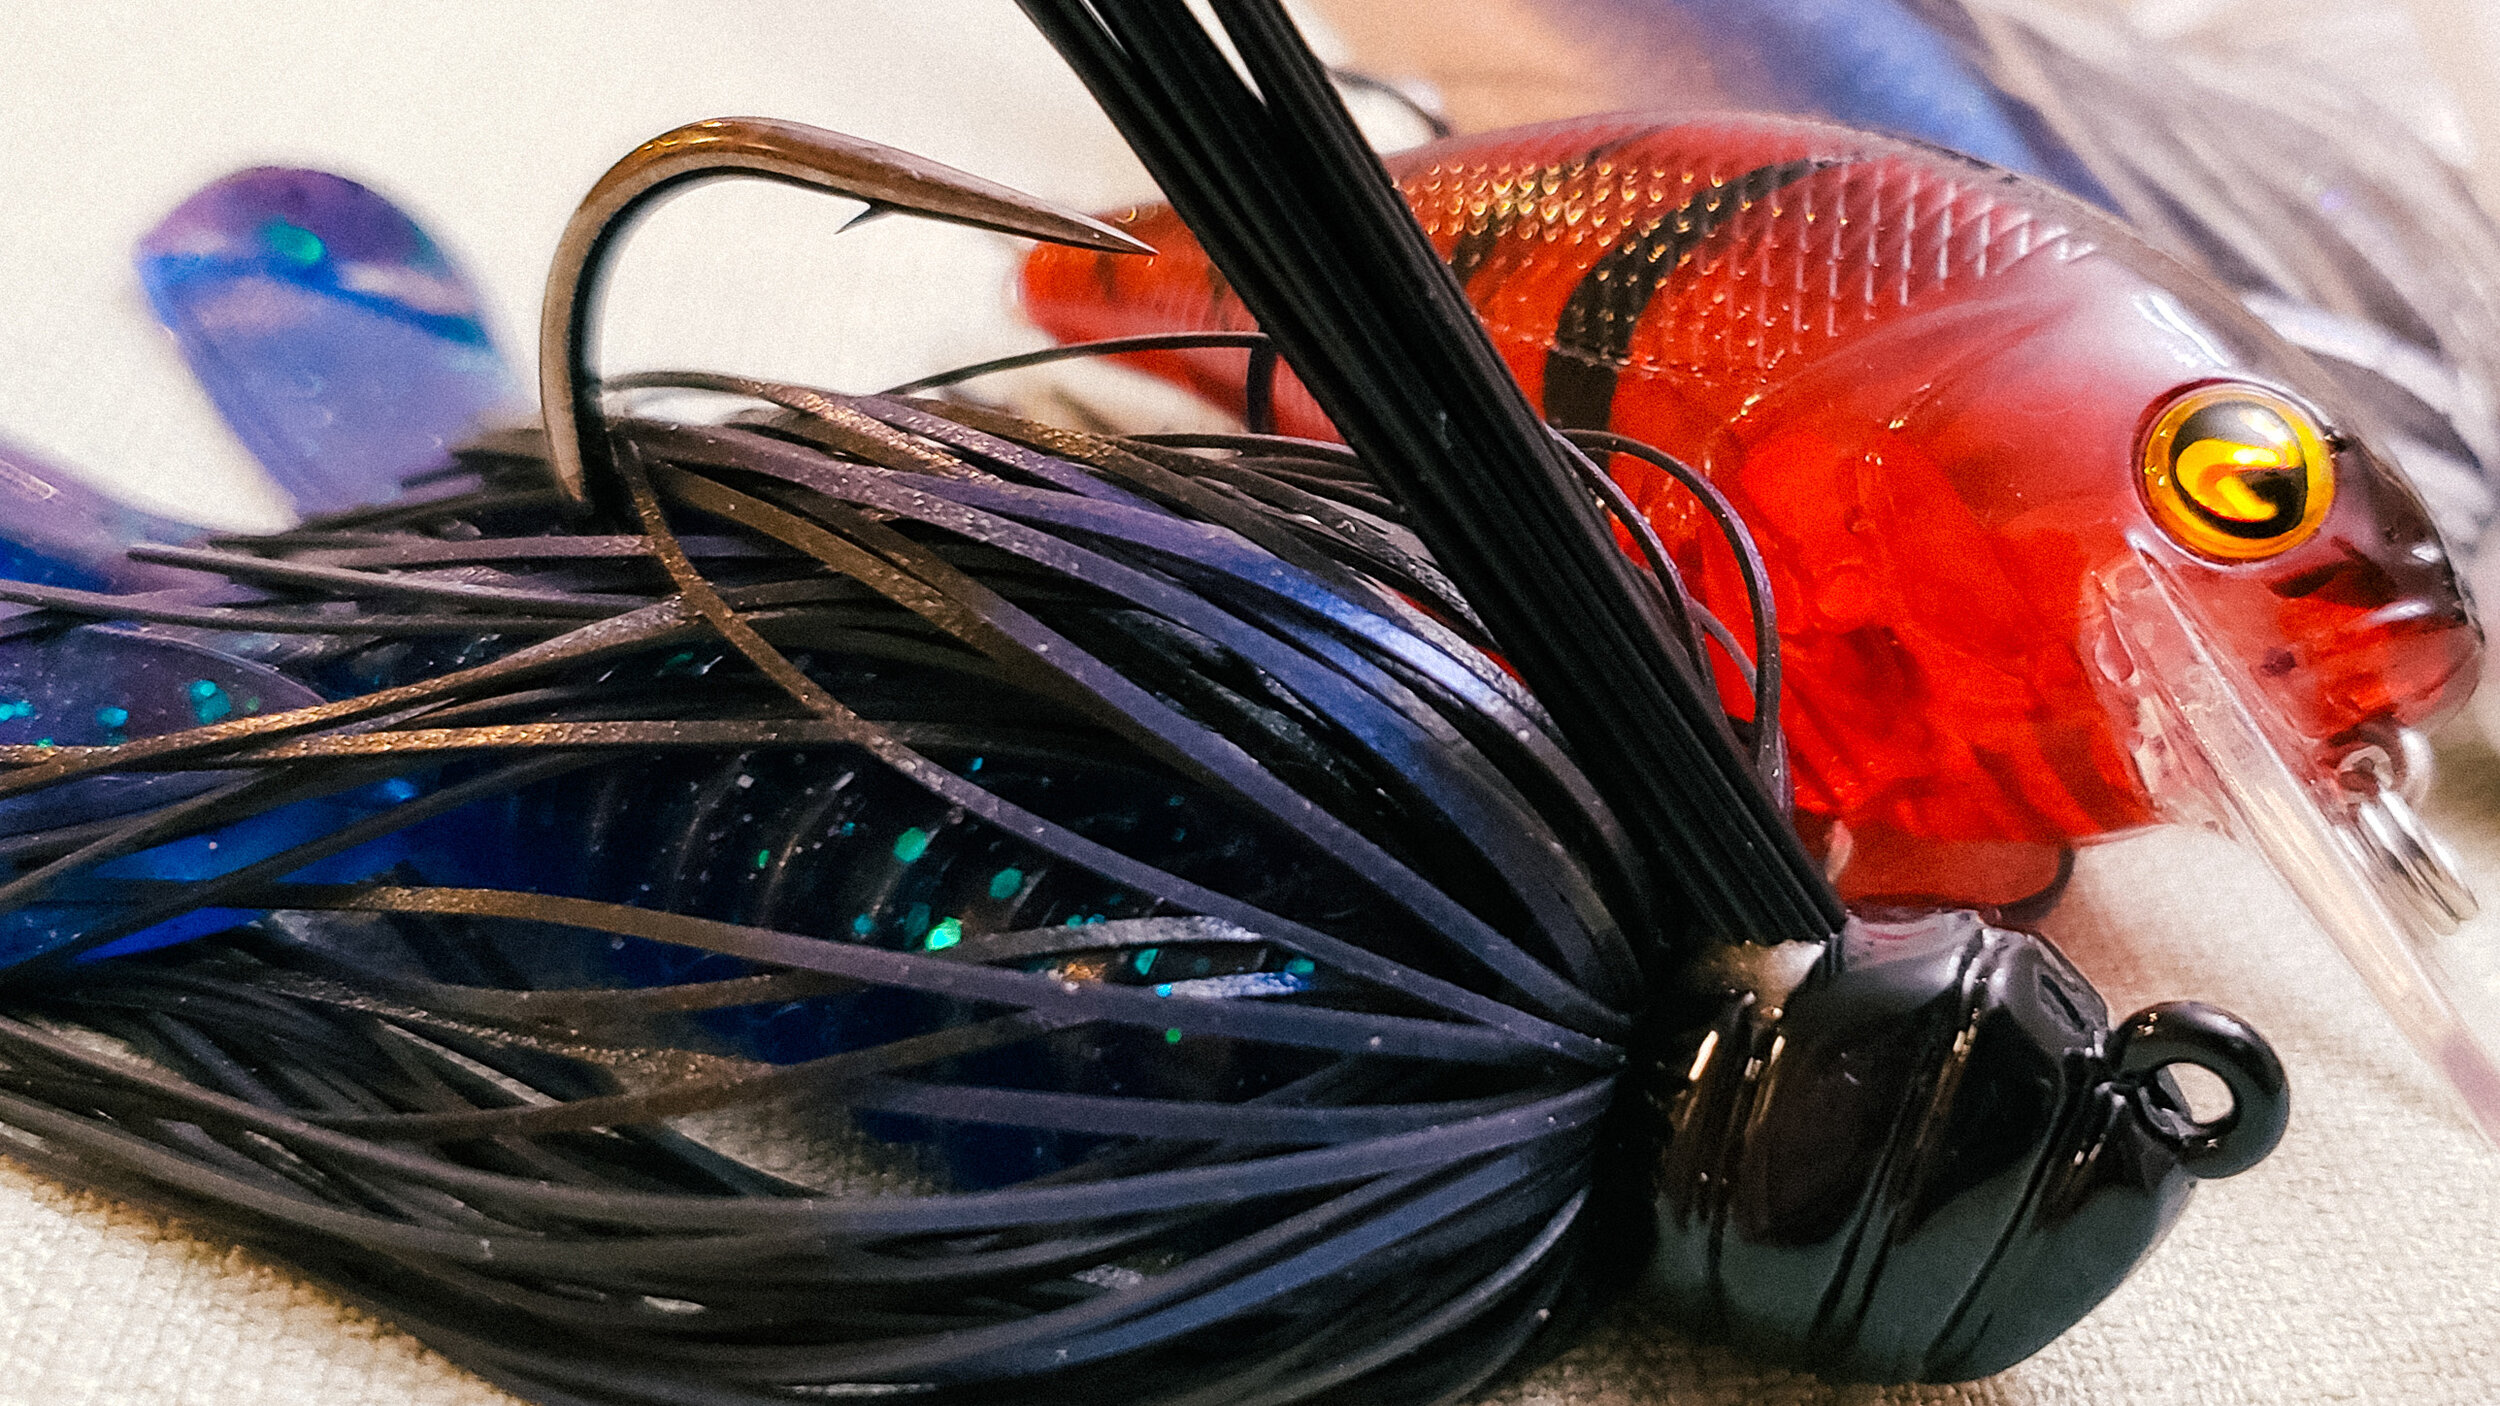 Best Baits for Cold vs Warm Water